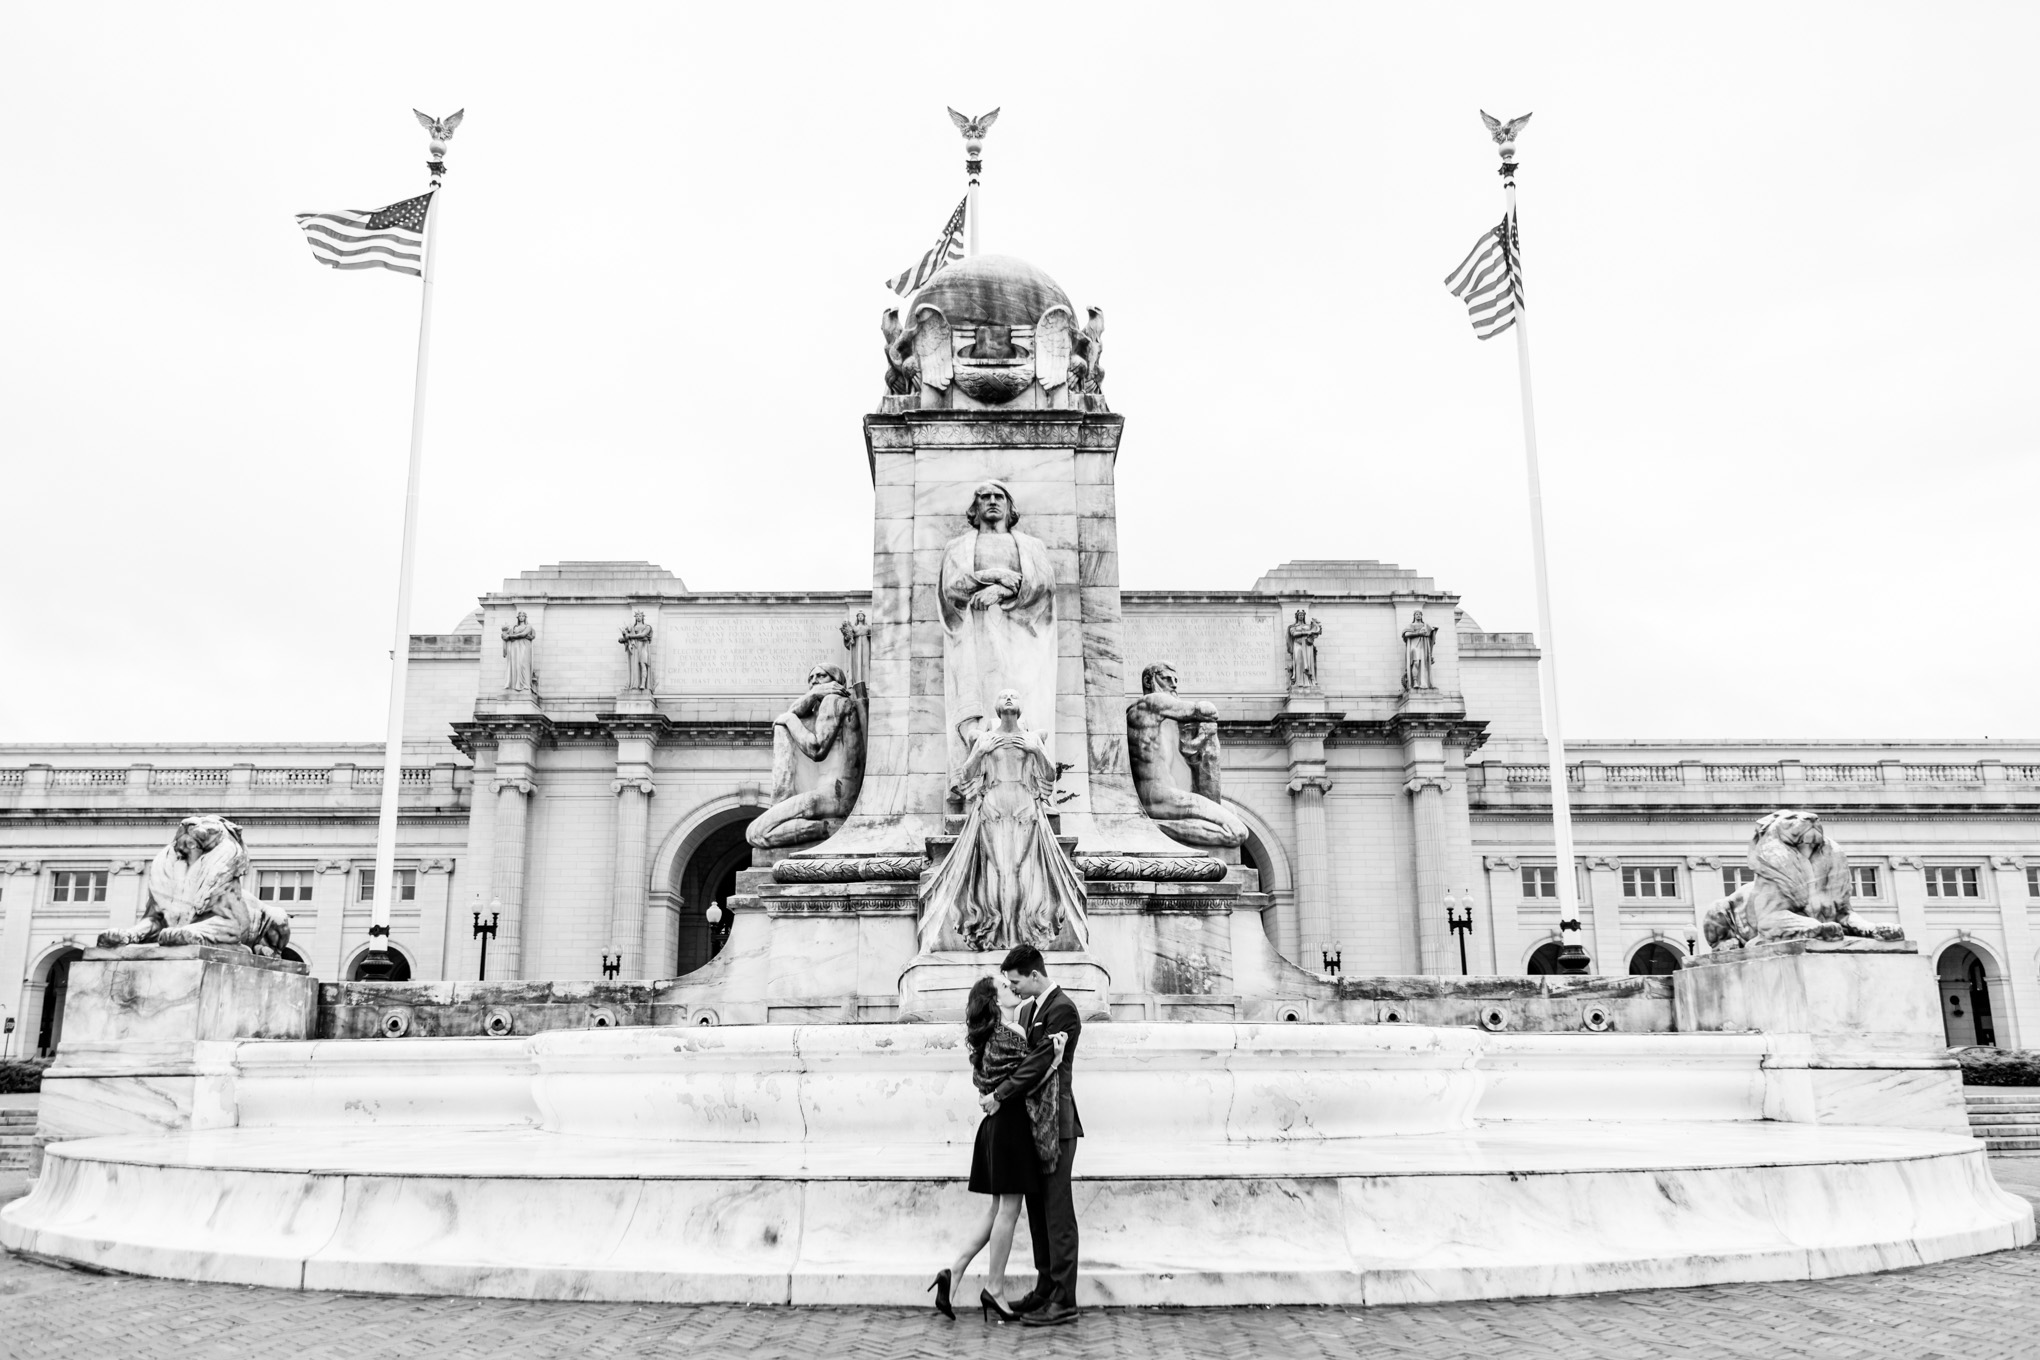 black and white engagement photos, black and white photography, black and white photos, engagement photos, black and white D.C., D.C. engagement photos, classic engagement photos, traditional engagement photos, engagement photos poses, classic architecture, D.C. architecture, Union Station D.C., Union Station, engaged couple, relationship goals, joyful couple, black and white sessions, fountain